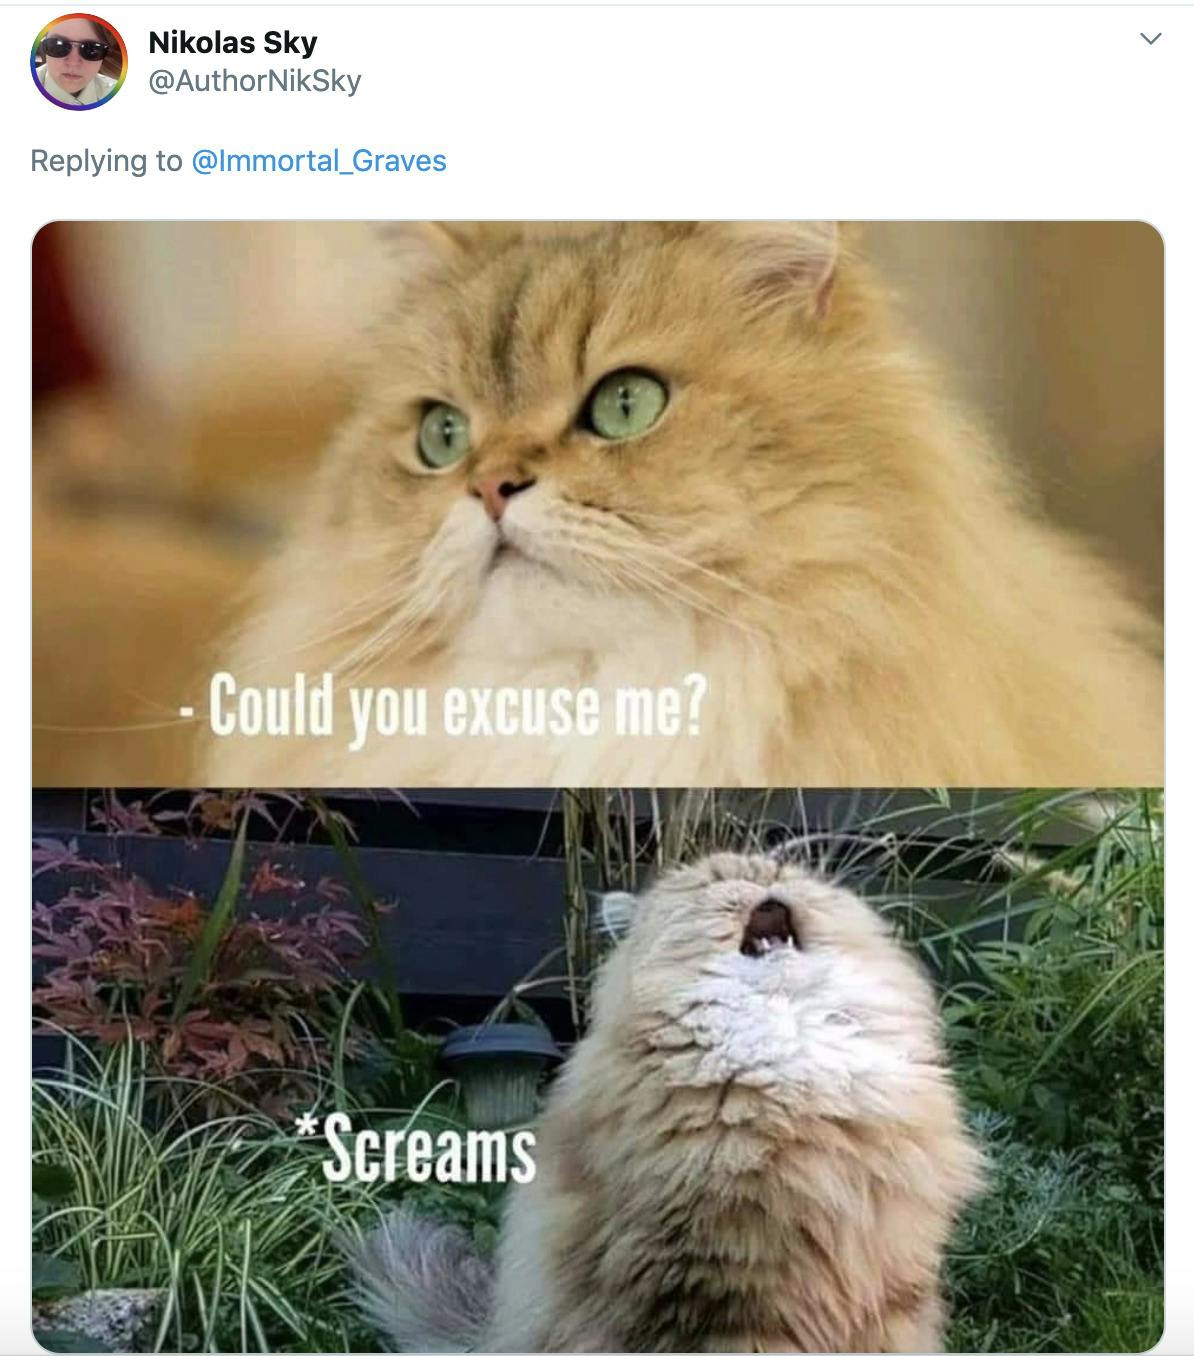 Two pictures of a fluffy orange cat, the first has "could you please excuse me?" written on it and the second features it screaming at the sky